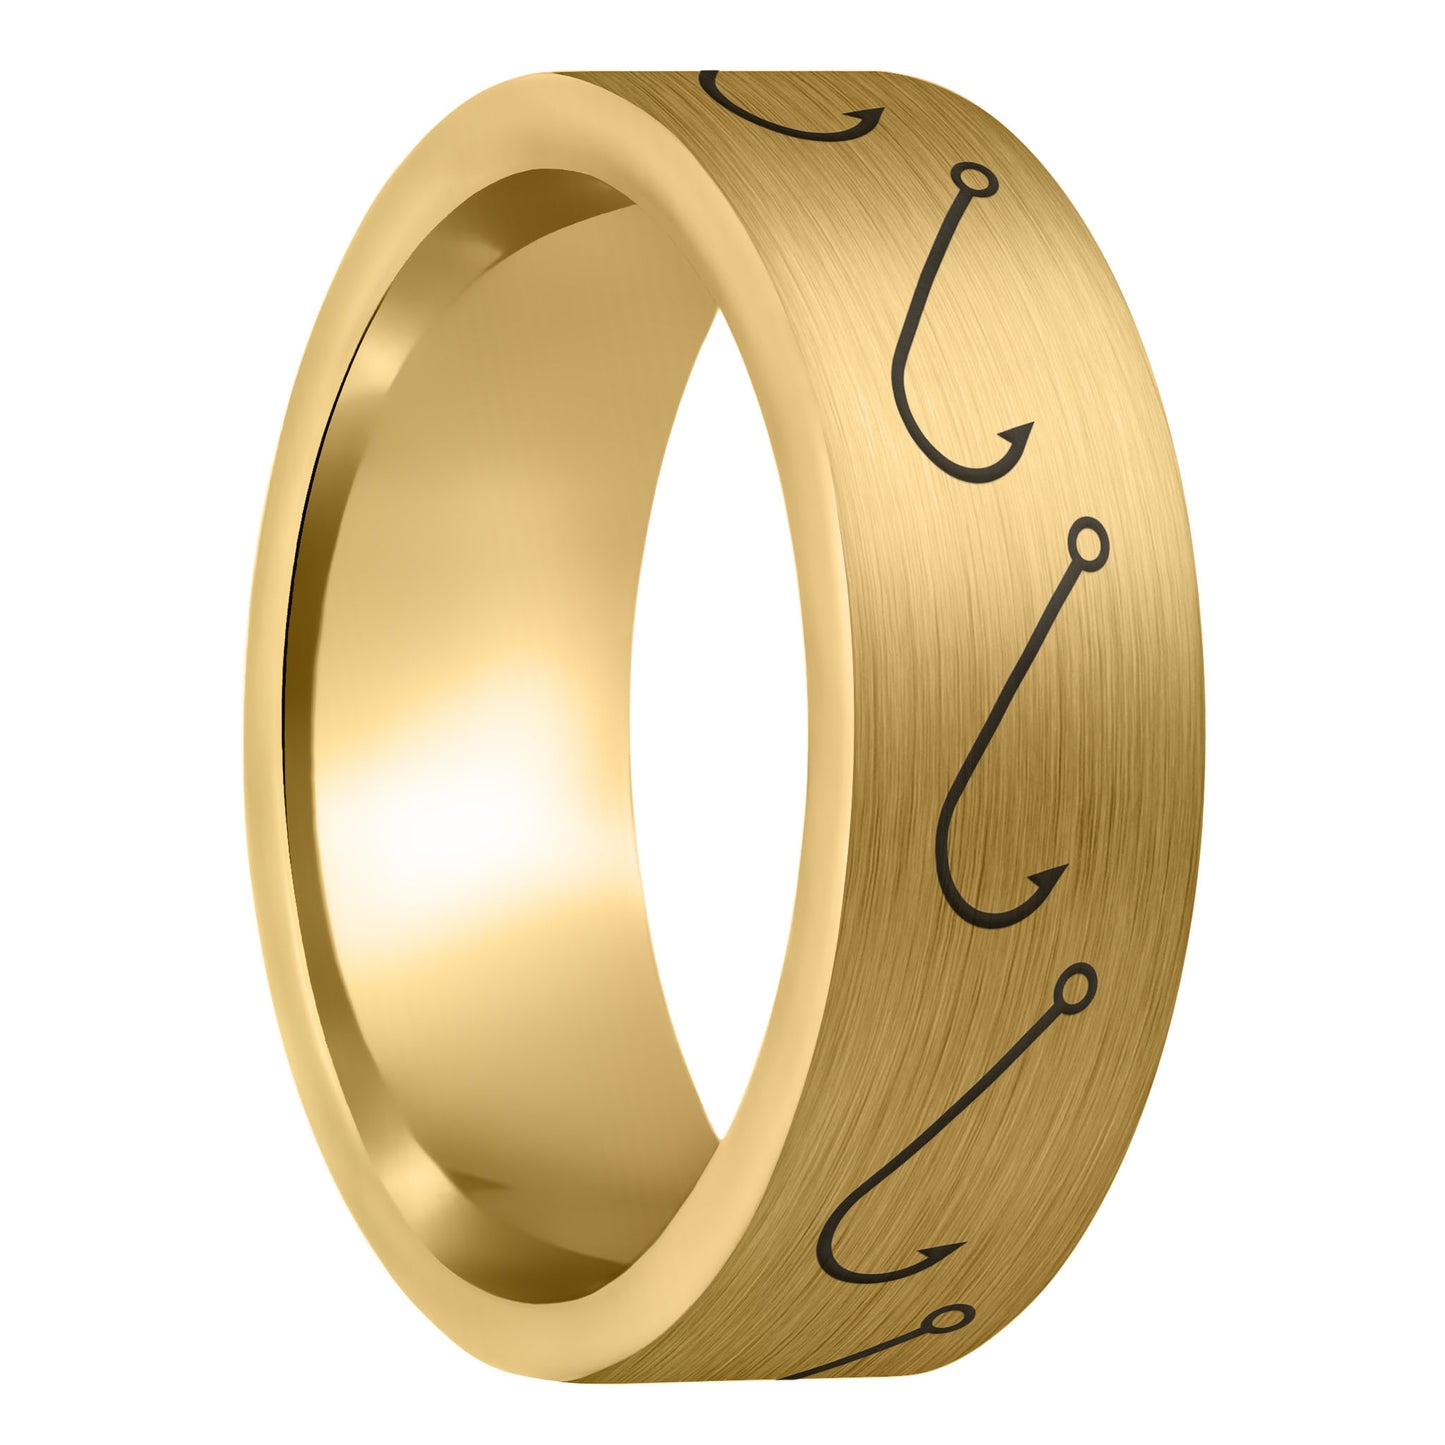 A simple fishing hook brushed gold tungsten men's wedding band displayed on a plain white background.